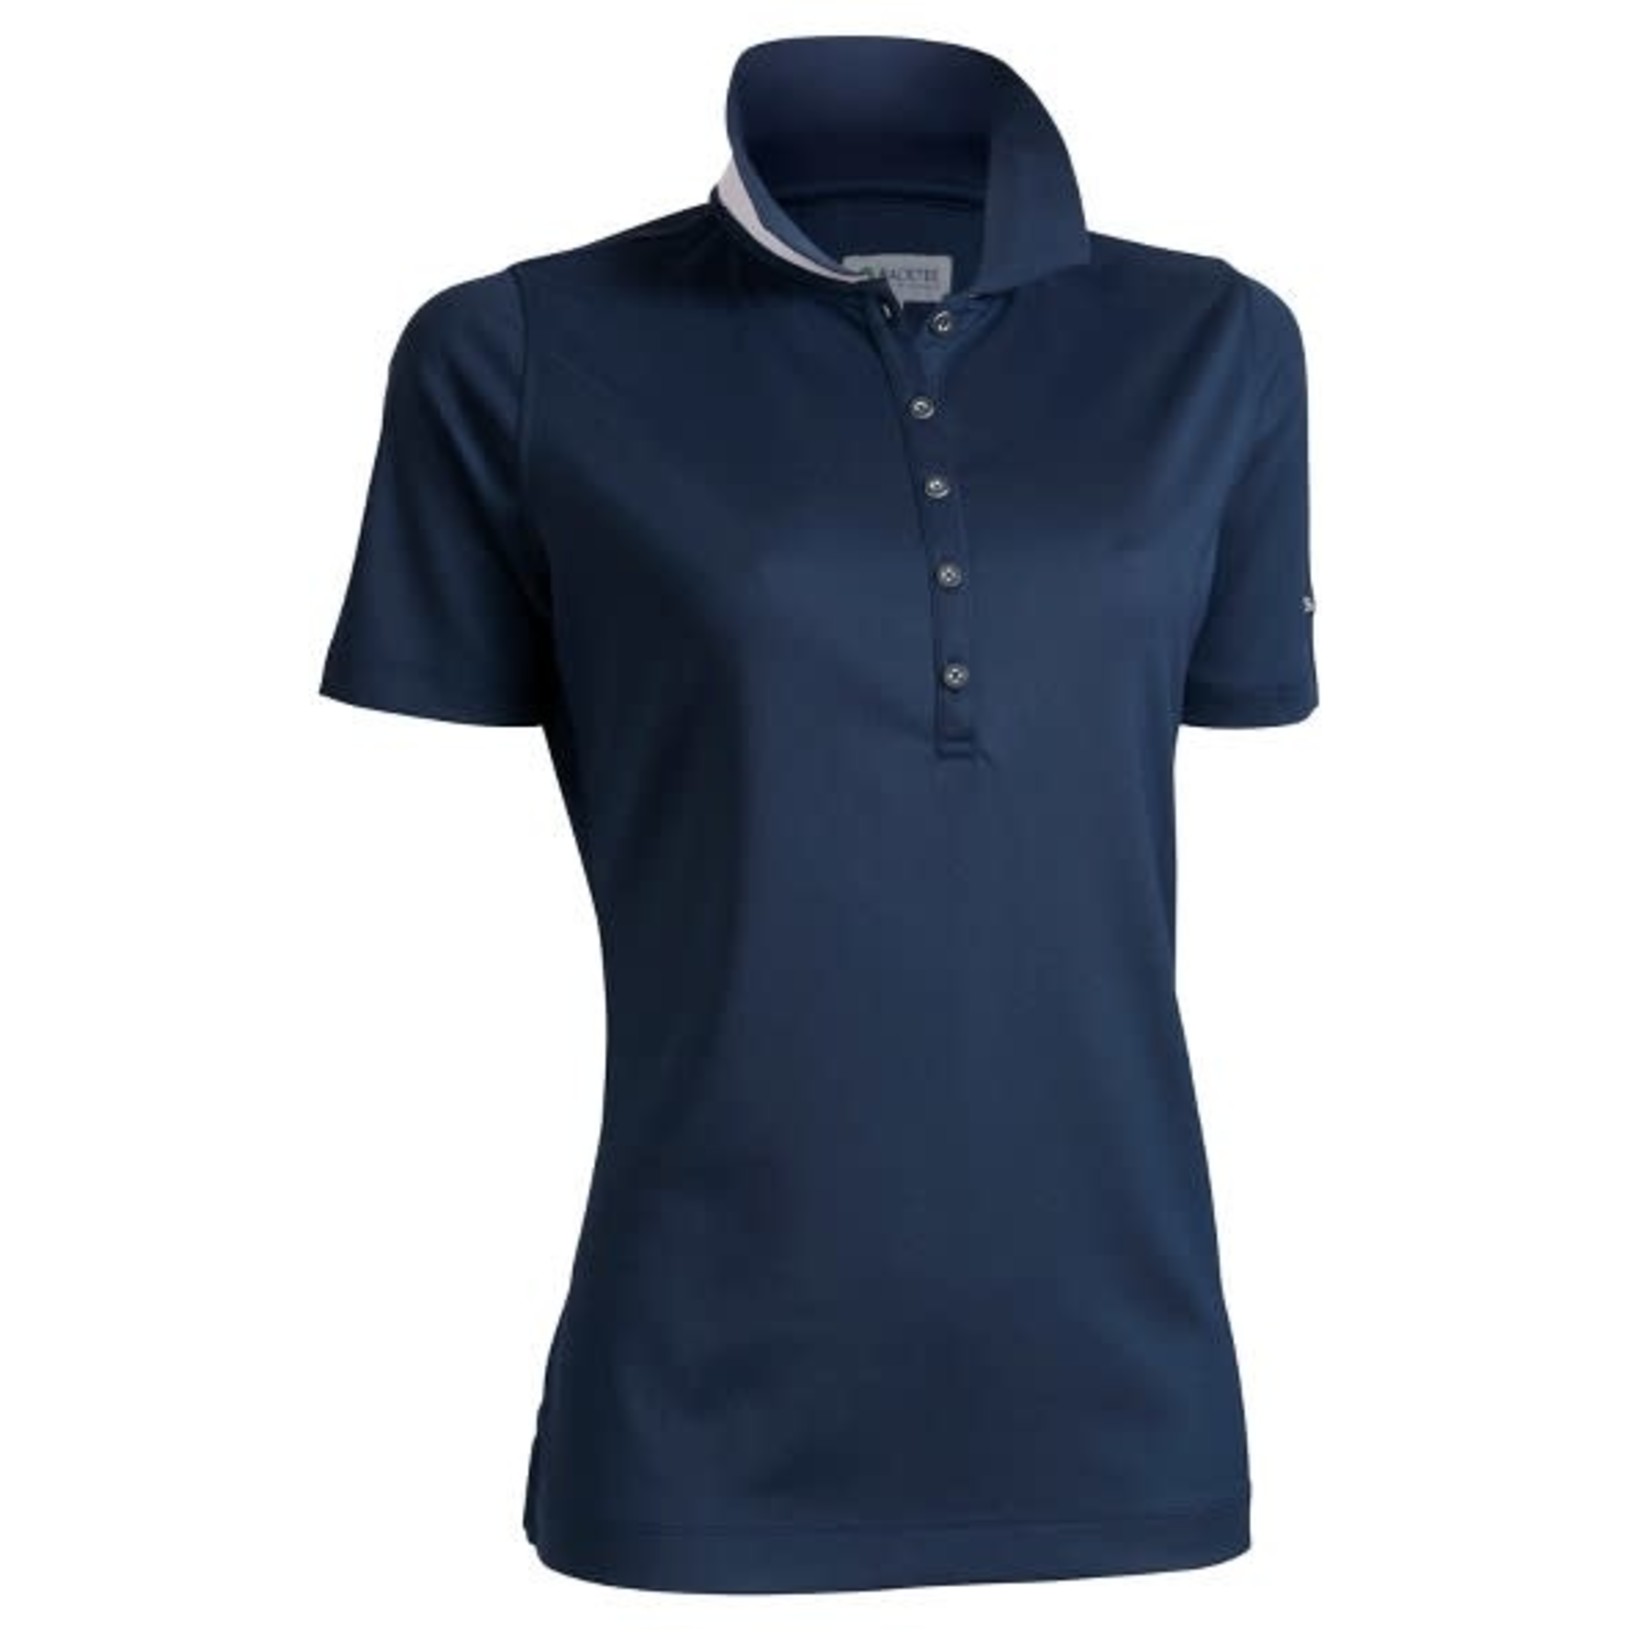 Backtee Backtee Ladies Quick Dry Perf Polo NAVY